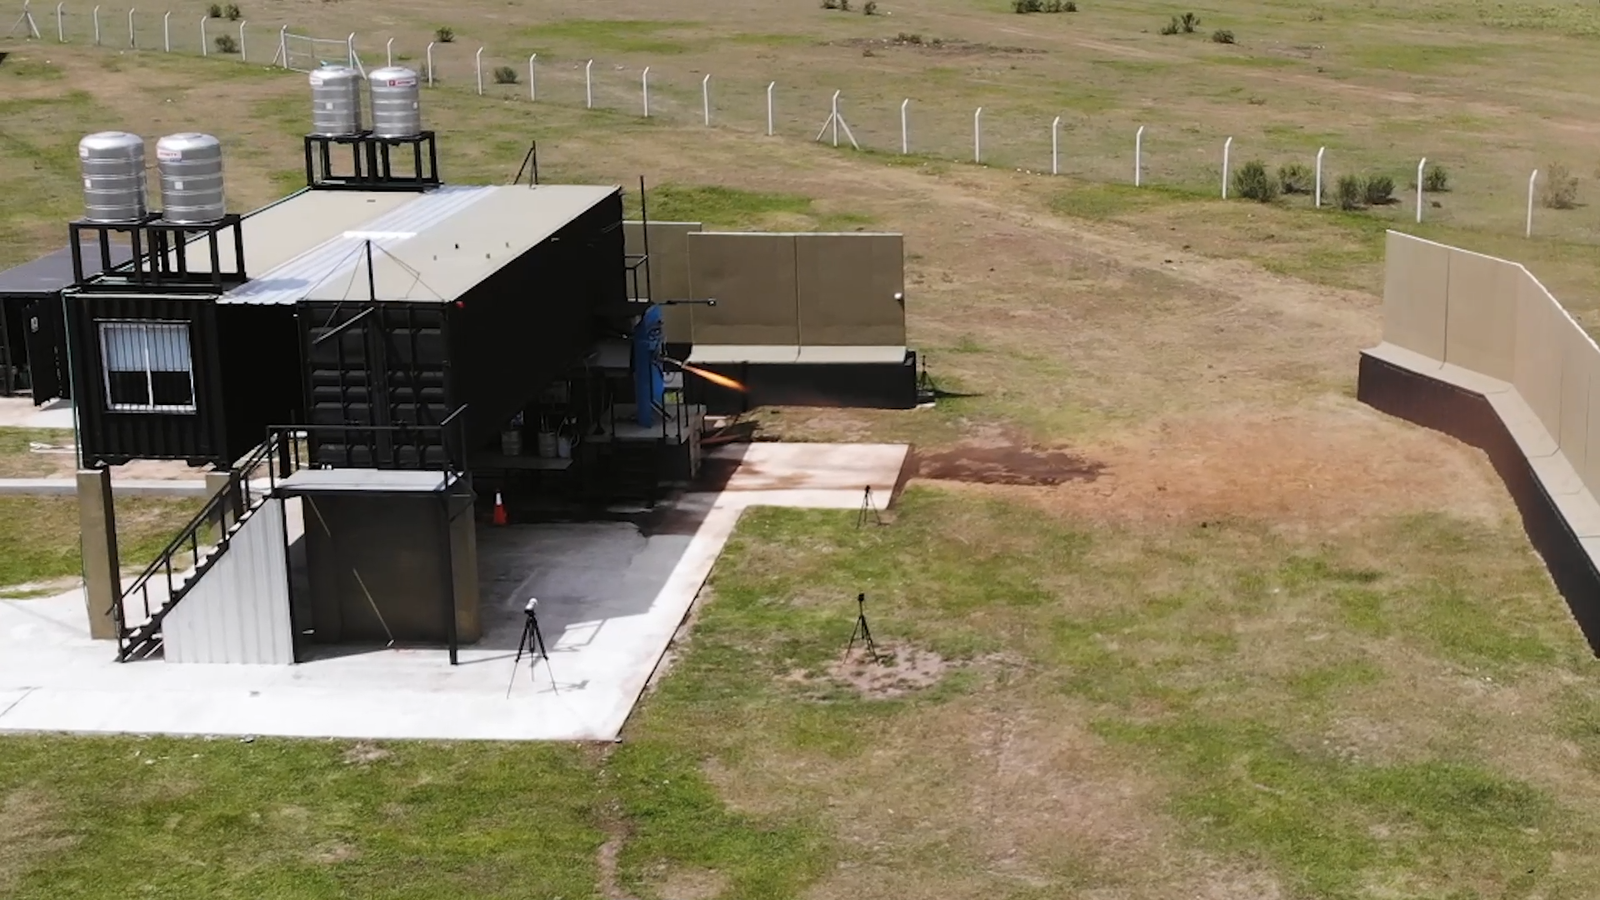 Drone view of our test site